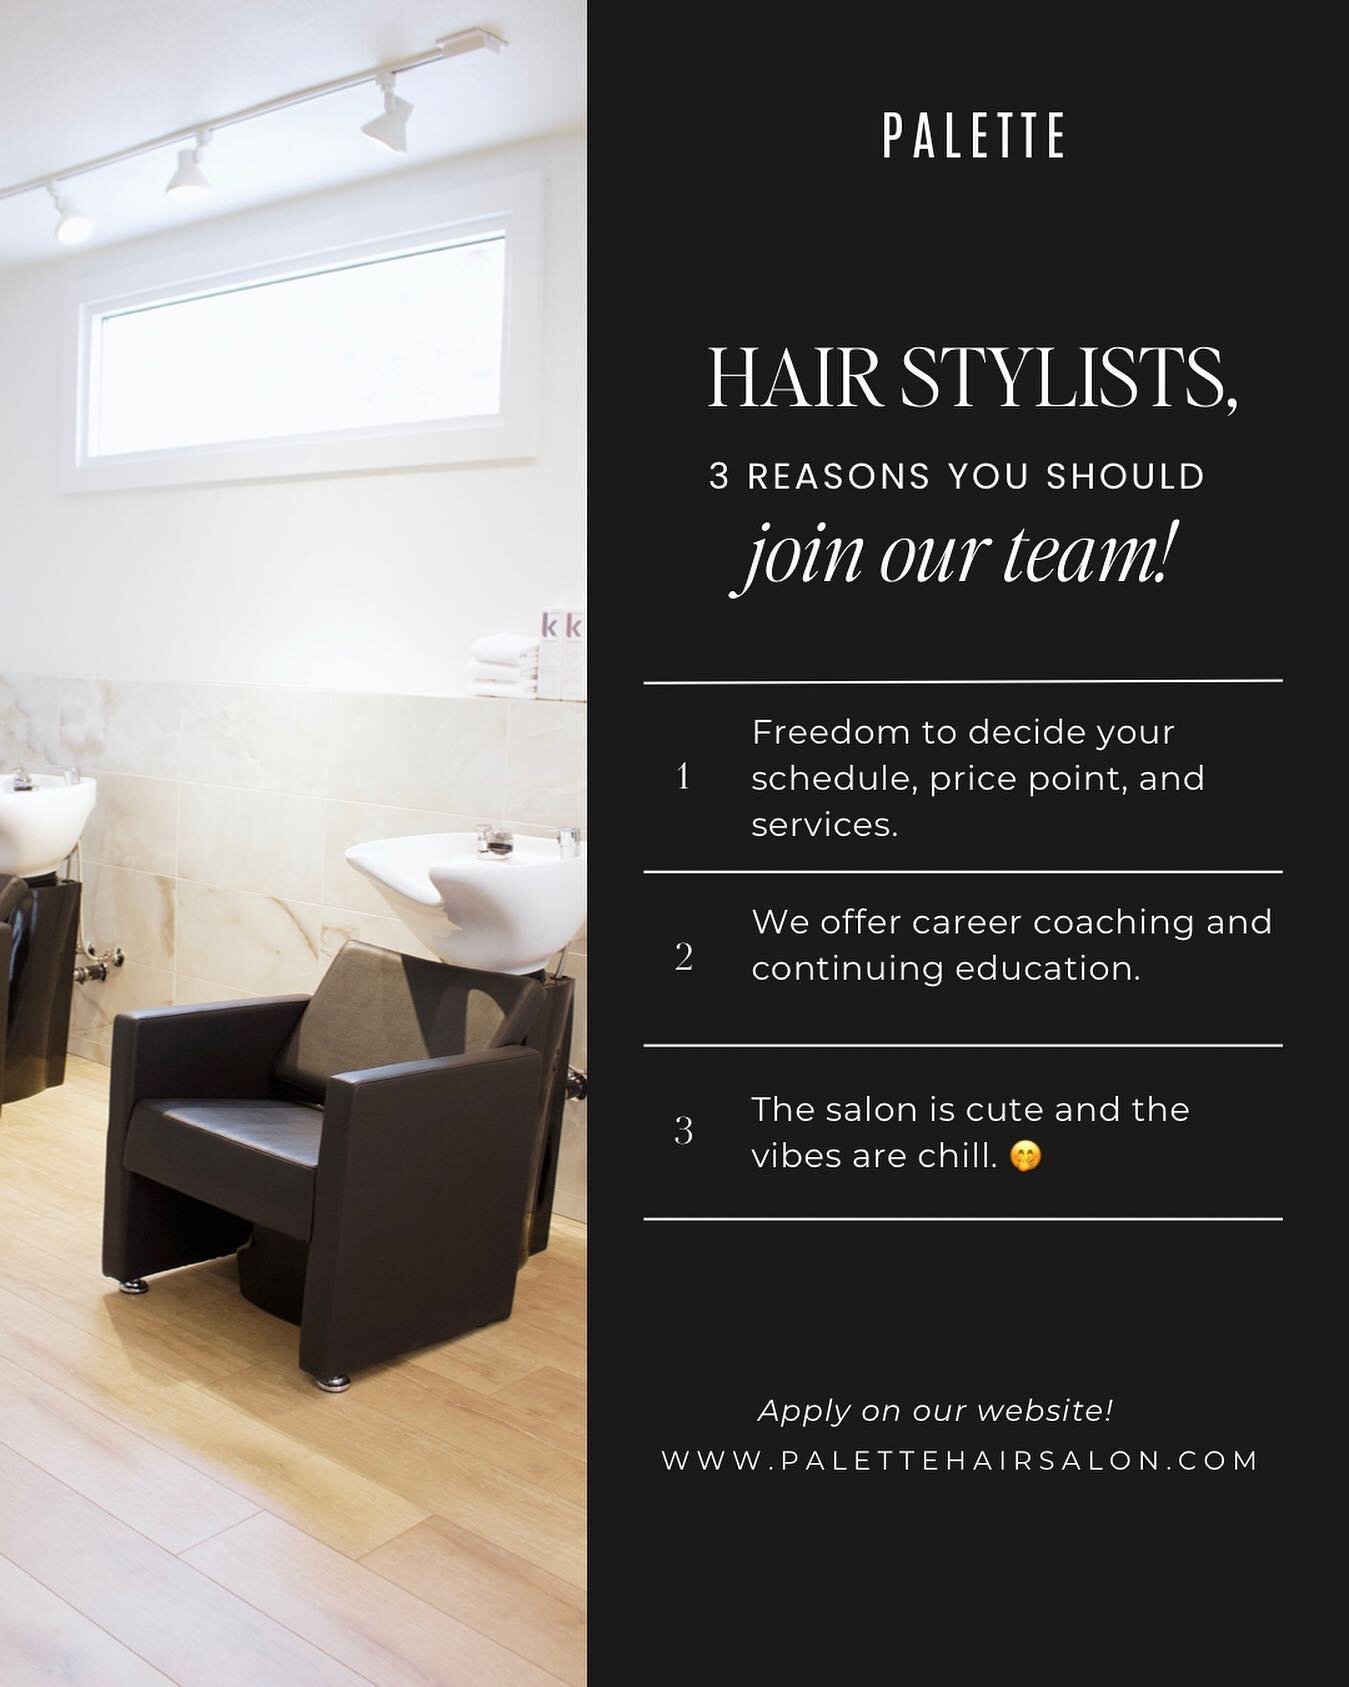 We&rsquo;re looking for stylists to join our team! Here are the top 3 reasons you&rsquo;ll love working here. 

&rarr; You get the freedom to decide your schedule, services and price point.

&rarr; We offer career coaching and continuing education.

